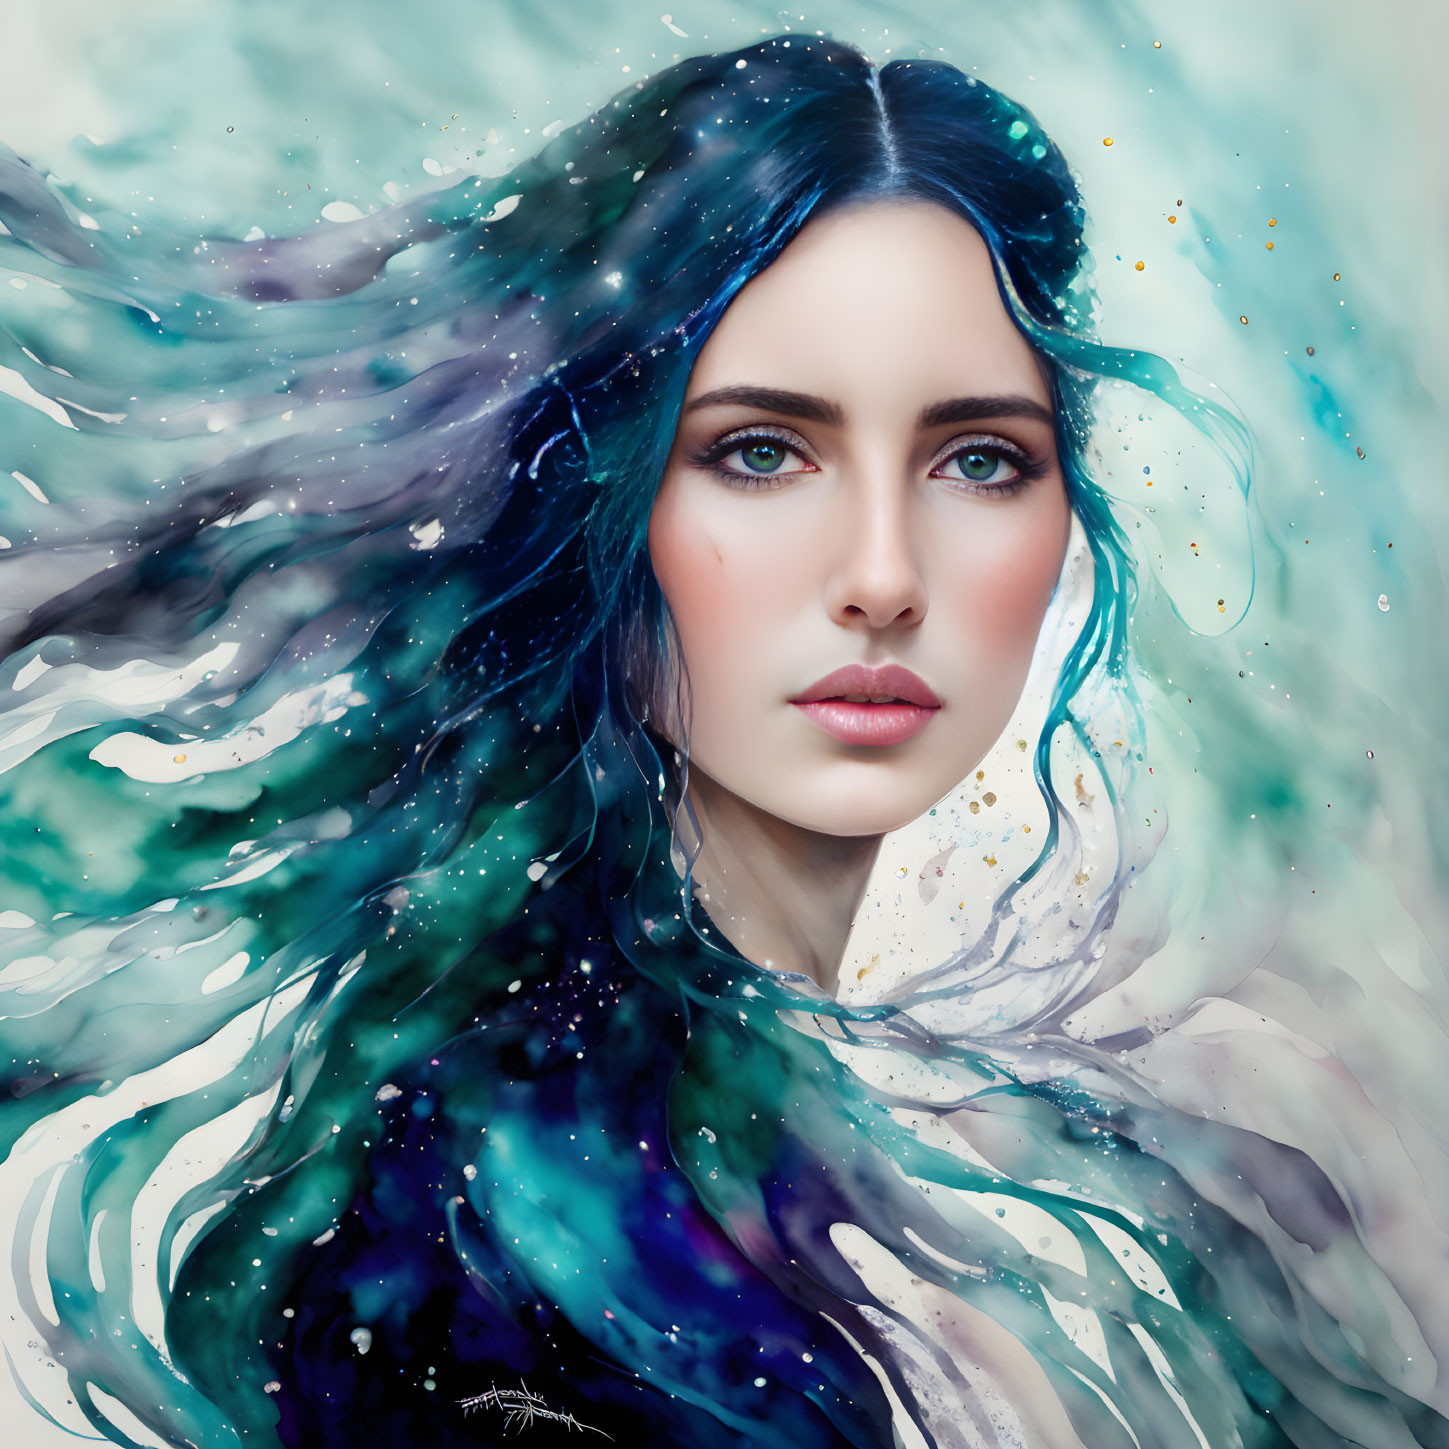 Digital Artwork: Woman with Blue Eyes Merging with Cosmic Background